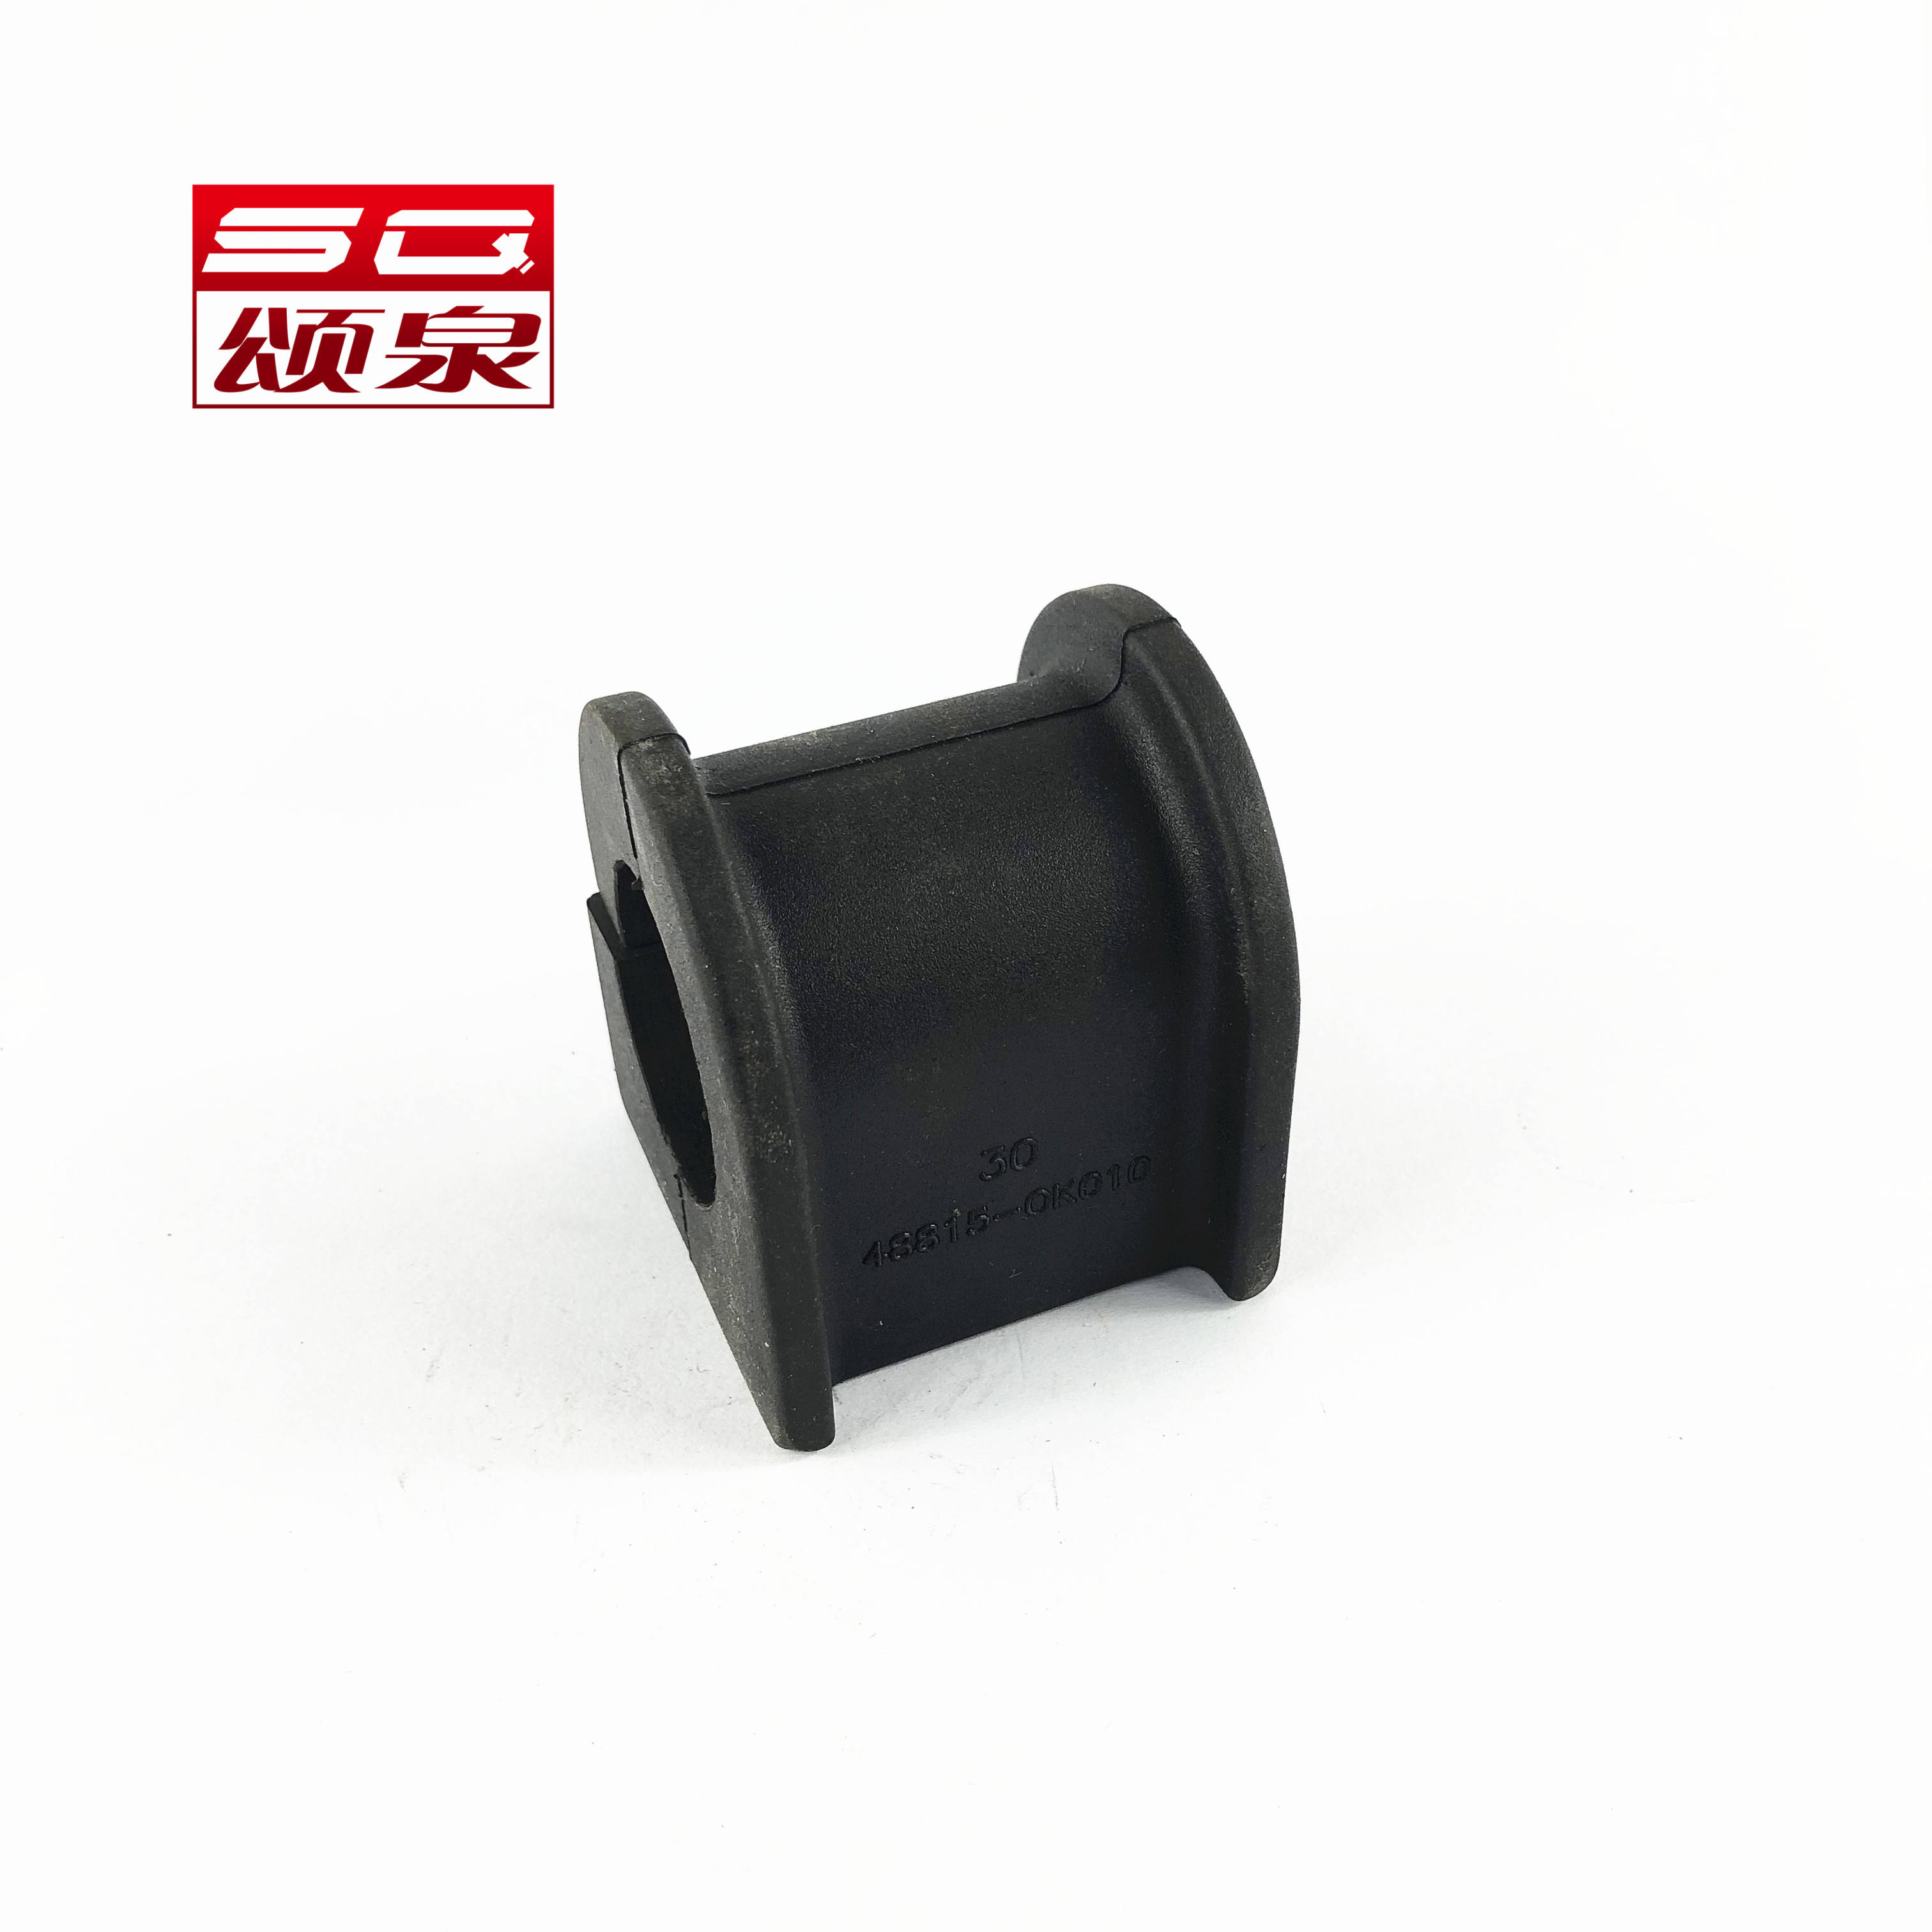 48815-0K010 48815-0K020 48815-0K040 Stabilizer Bushing Wholesale Factory cheap Price for TOYOTA Hilux 2004-